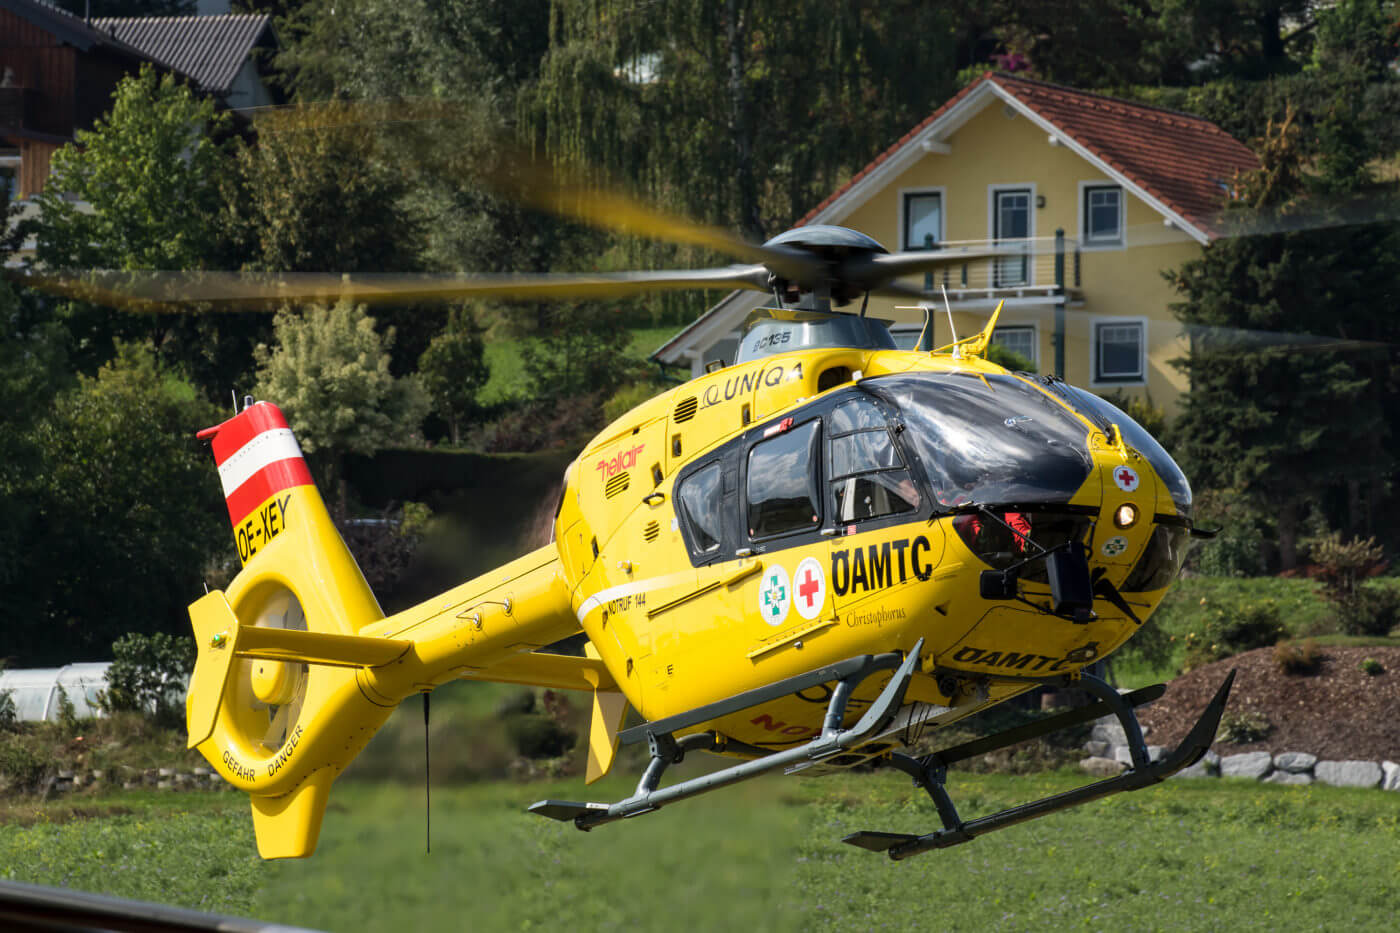 Austrian air rescue operator OAMTC had an Airbus EC135 T2+ at HeliDays, and demonstrated its day-to-day services with the aircraft. Florian Szczepanek and Alexander Schwarz Photo